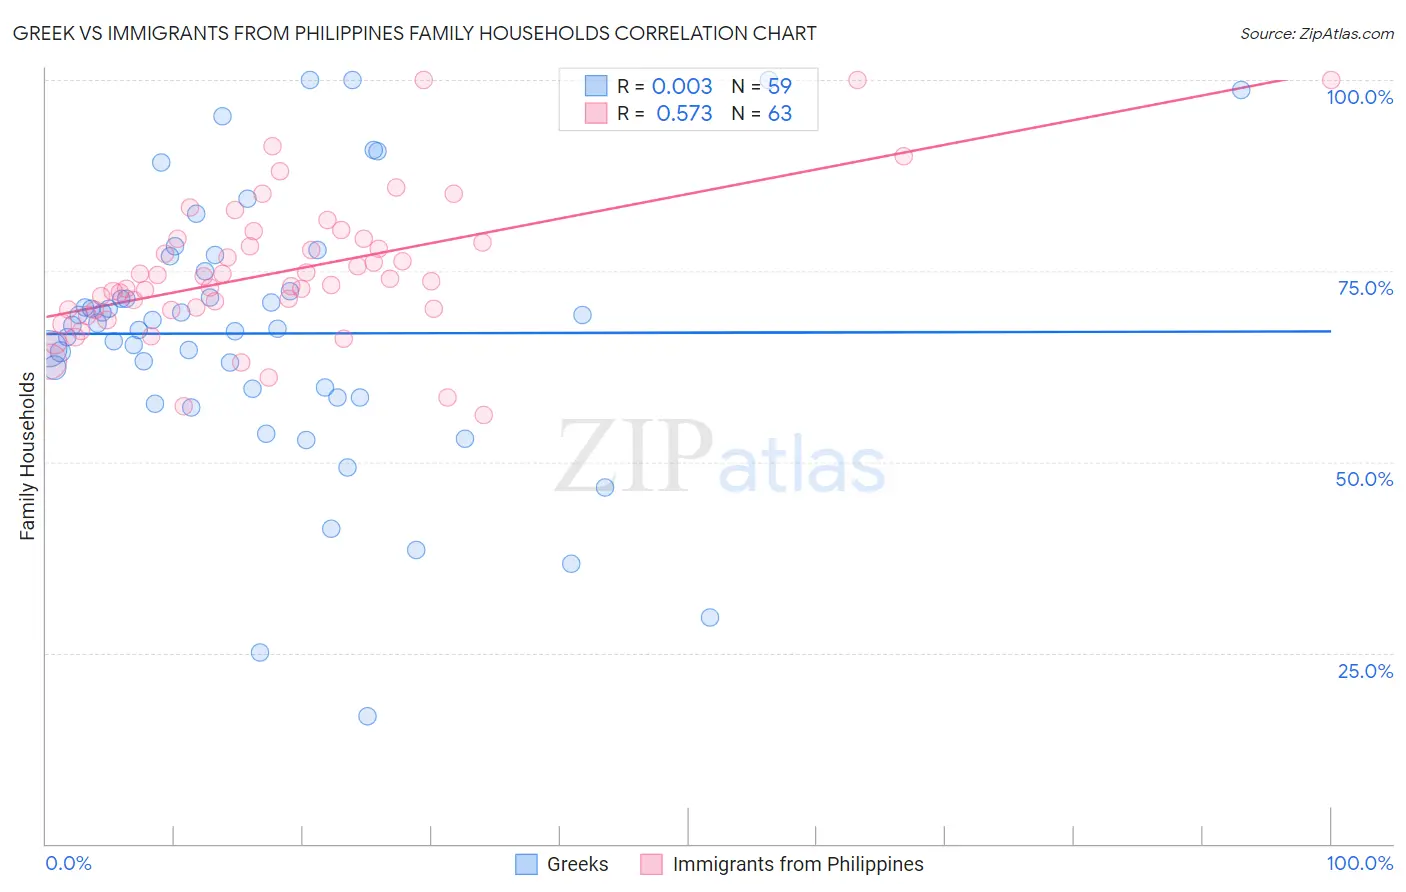 Greek vs Immigrants from Philippines Family Households